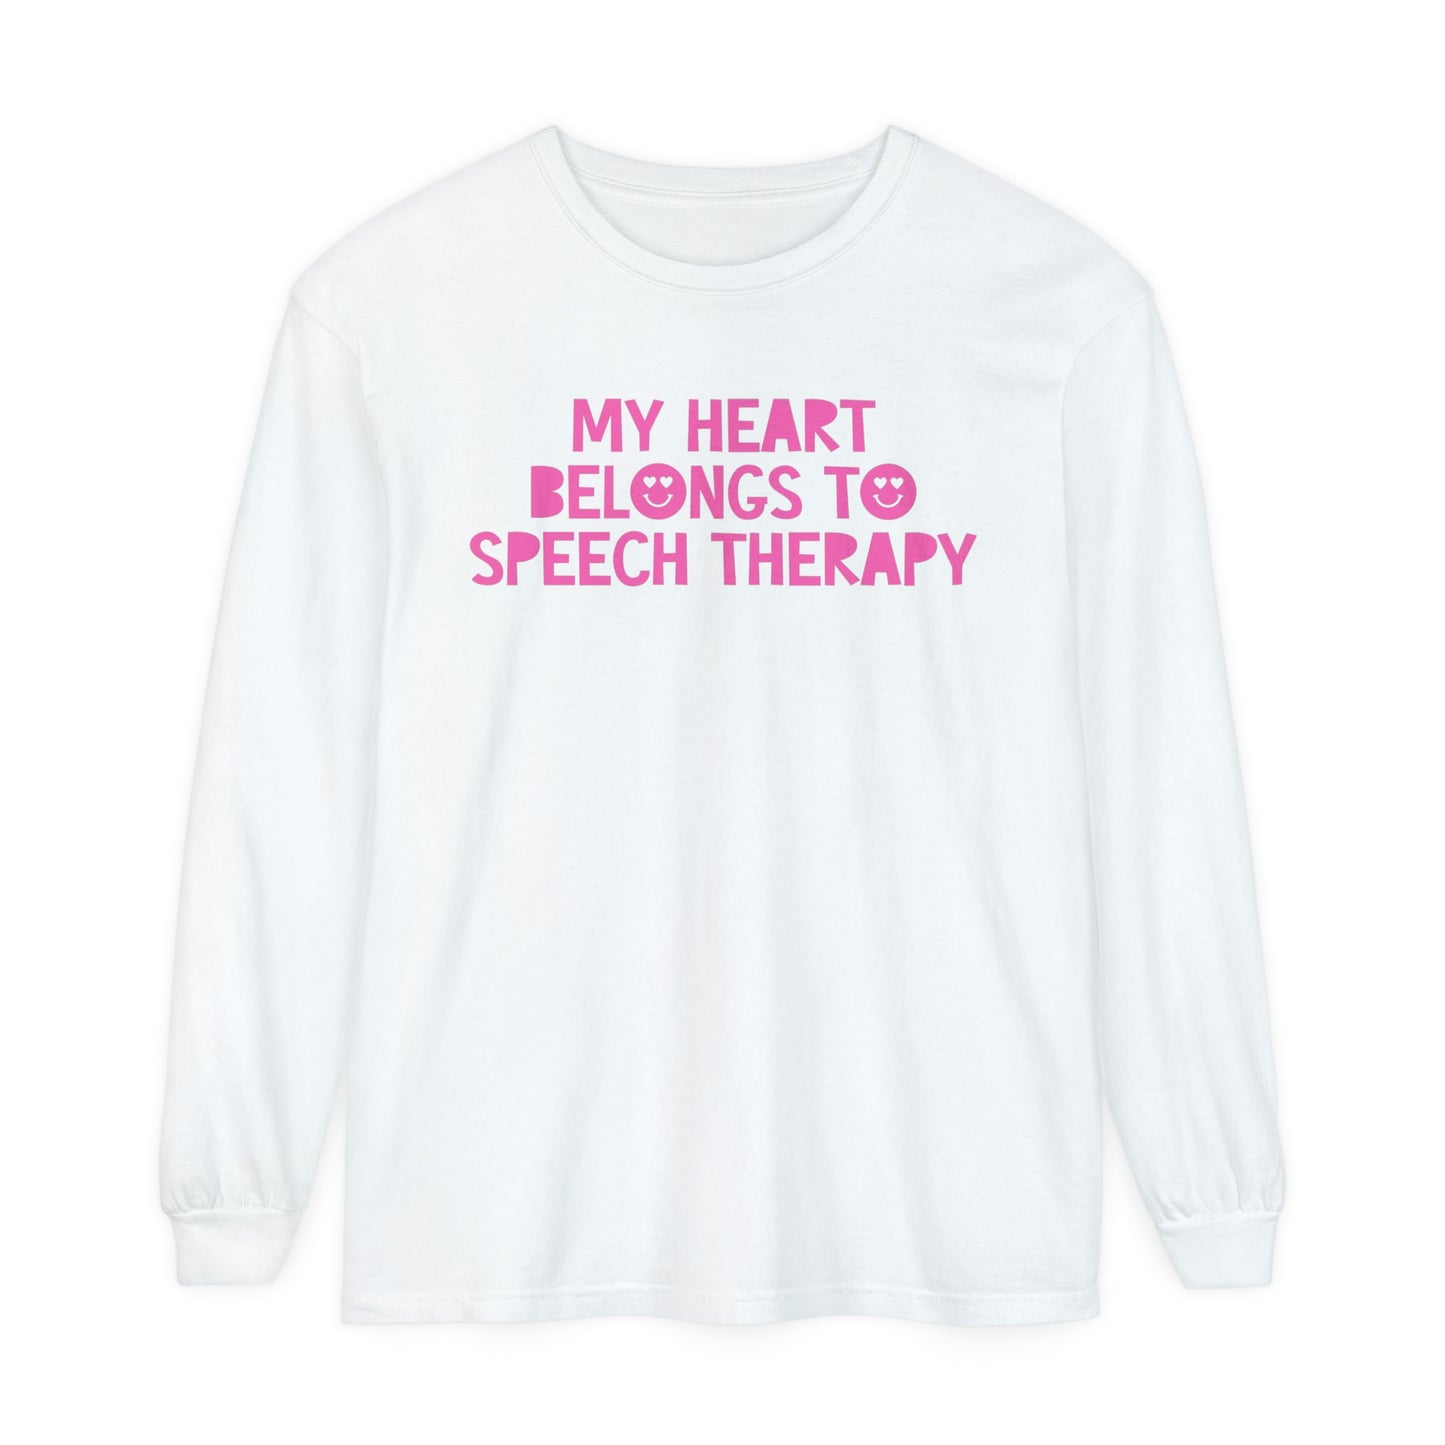 My Heart Belongs to Speech Therapy Long Sleeve Comfort Colors T-Shirt